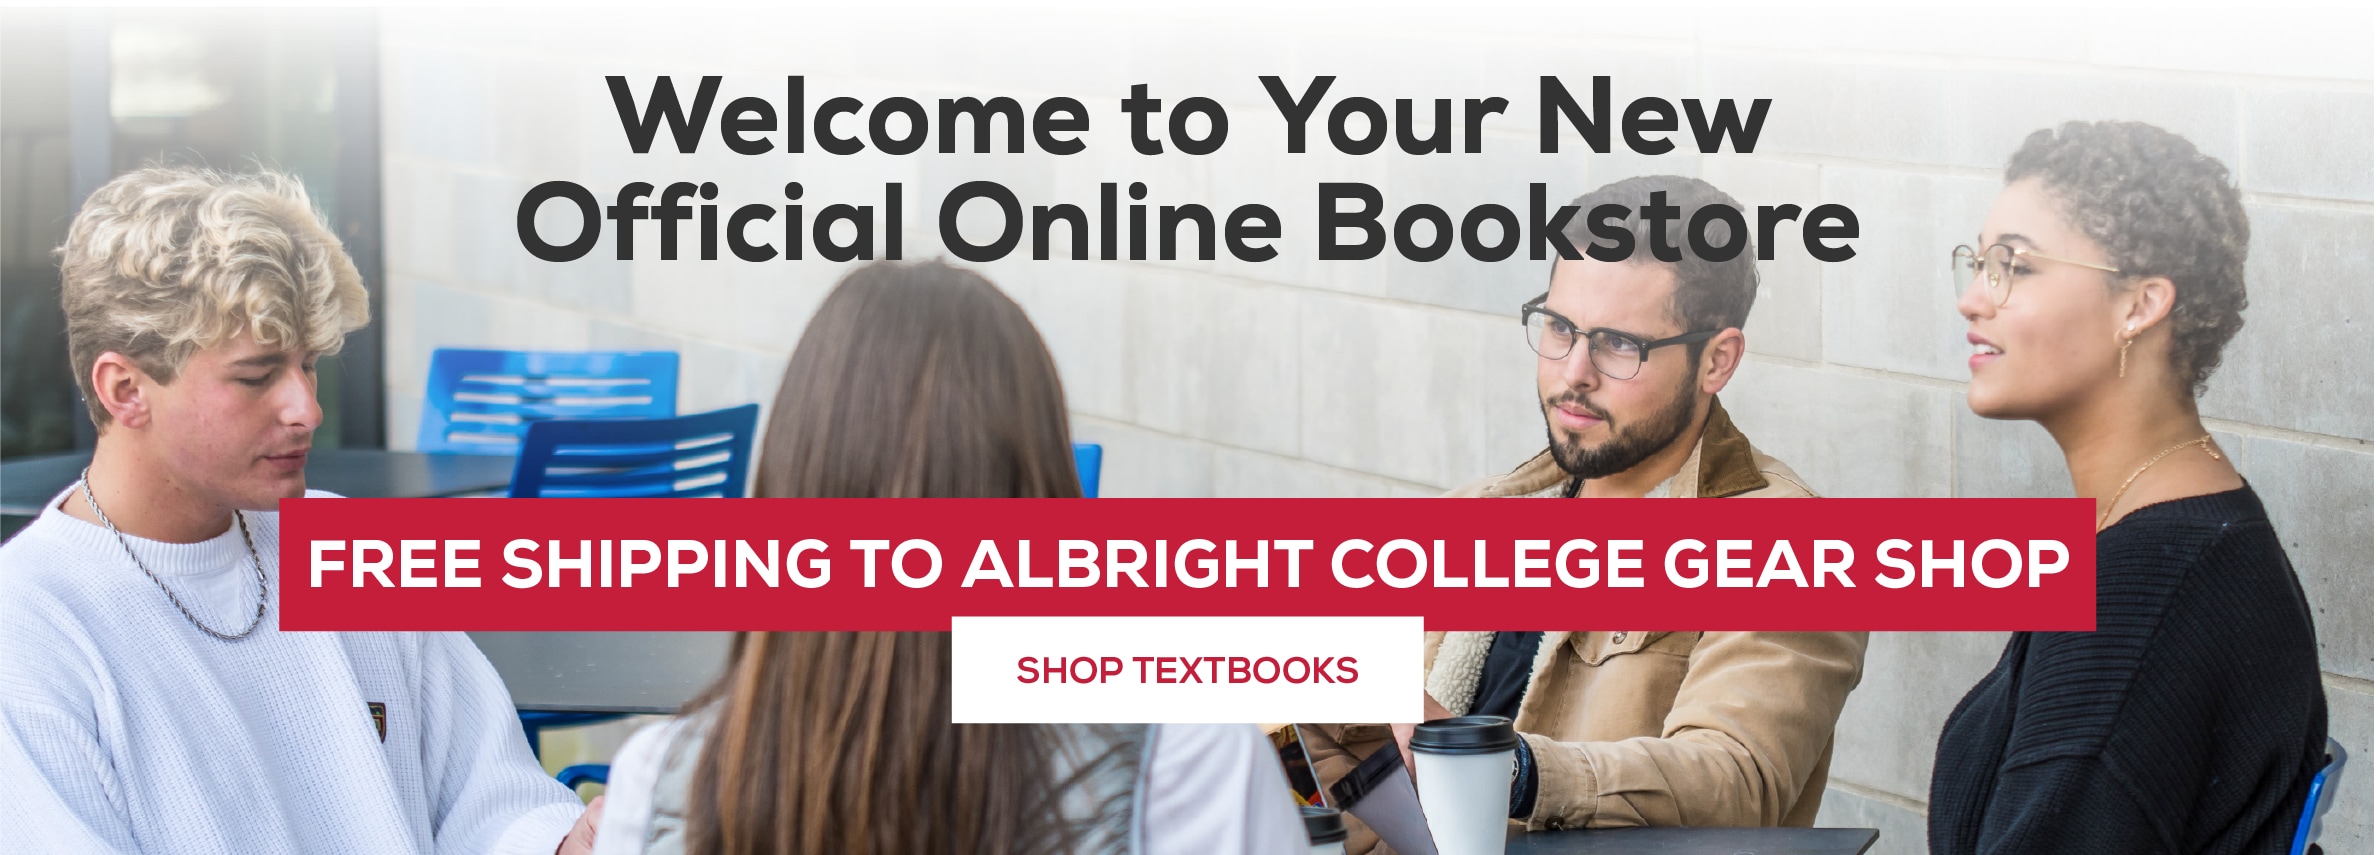 Welcome to Your Official Online Bookstore Free Shipping to Albright College Gear Shop